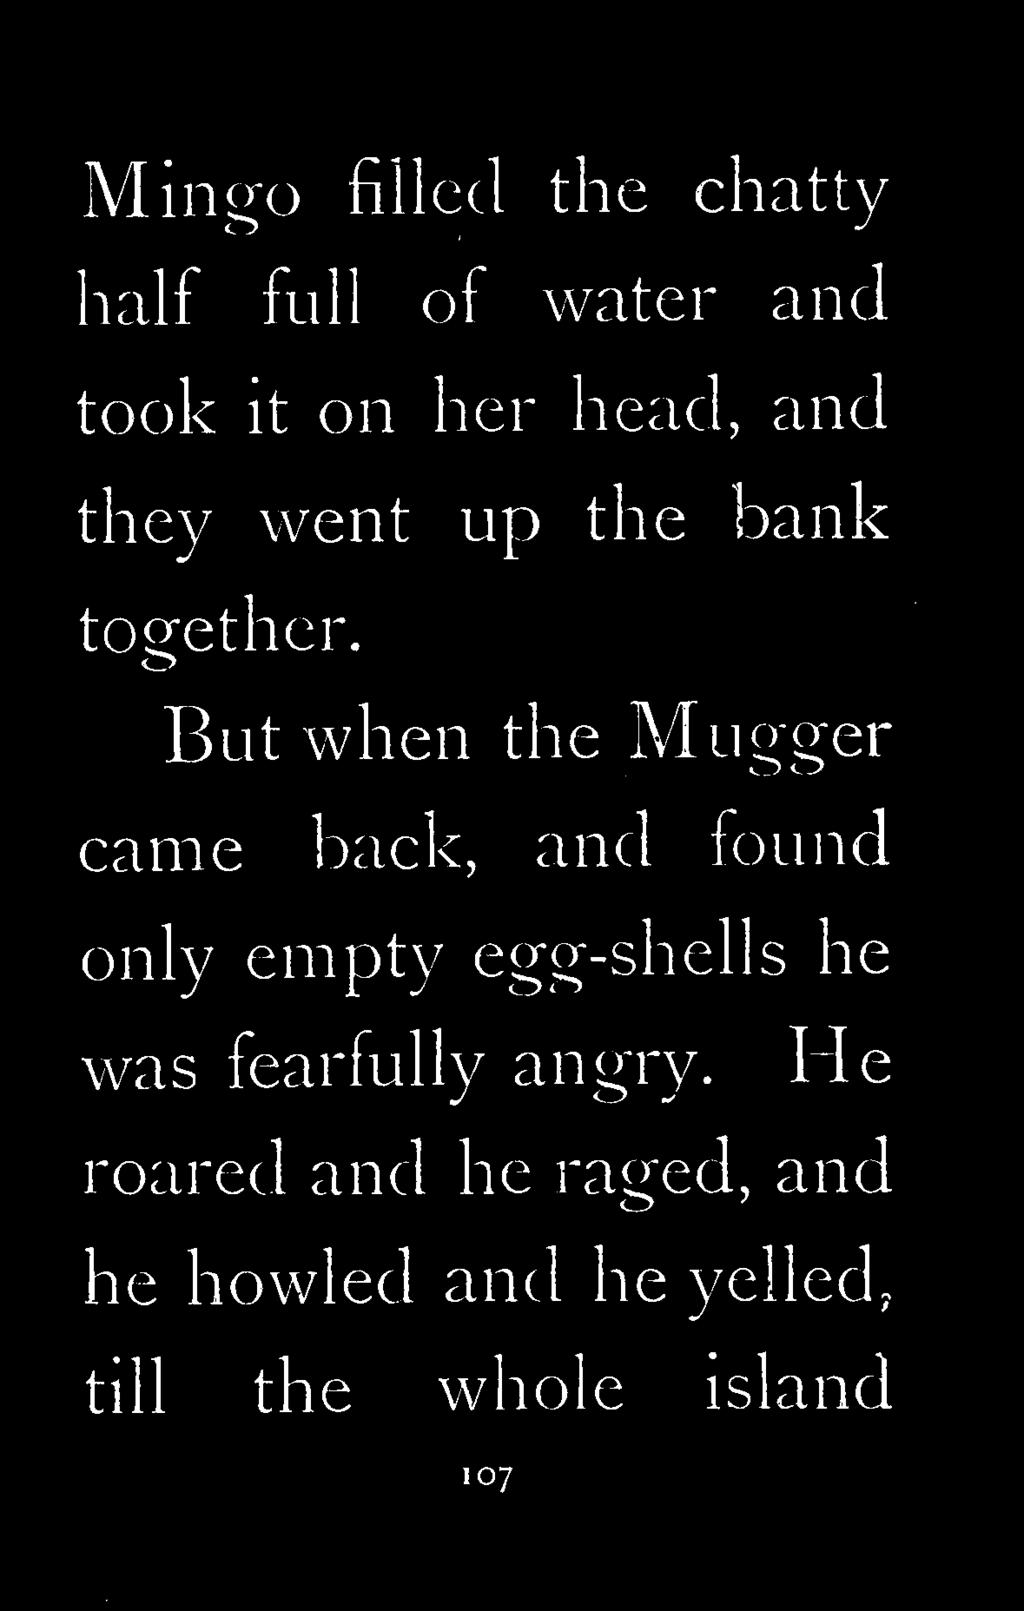 But when the Mugger came back, and found only empty egg-shells he